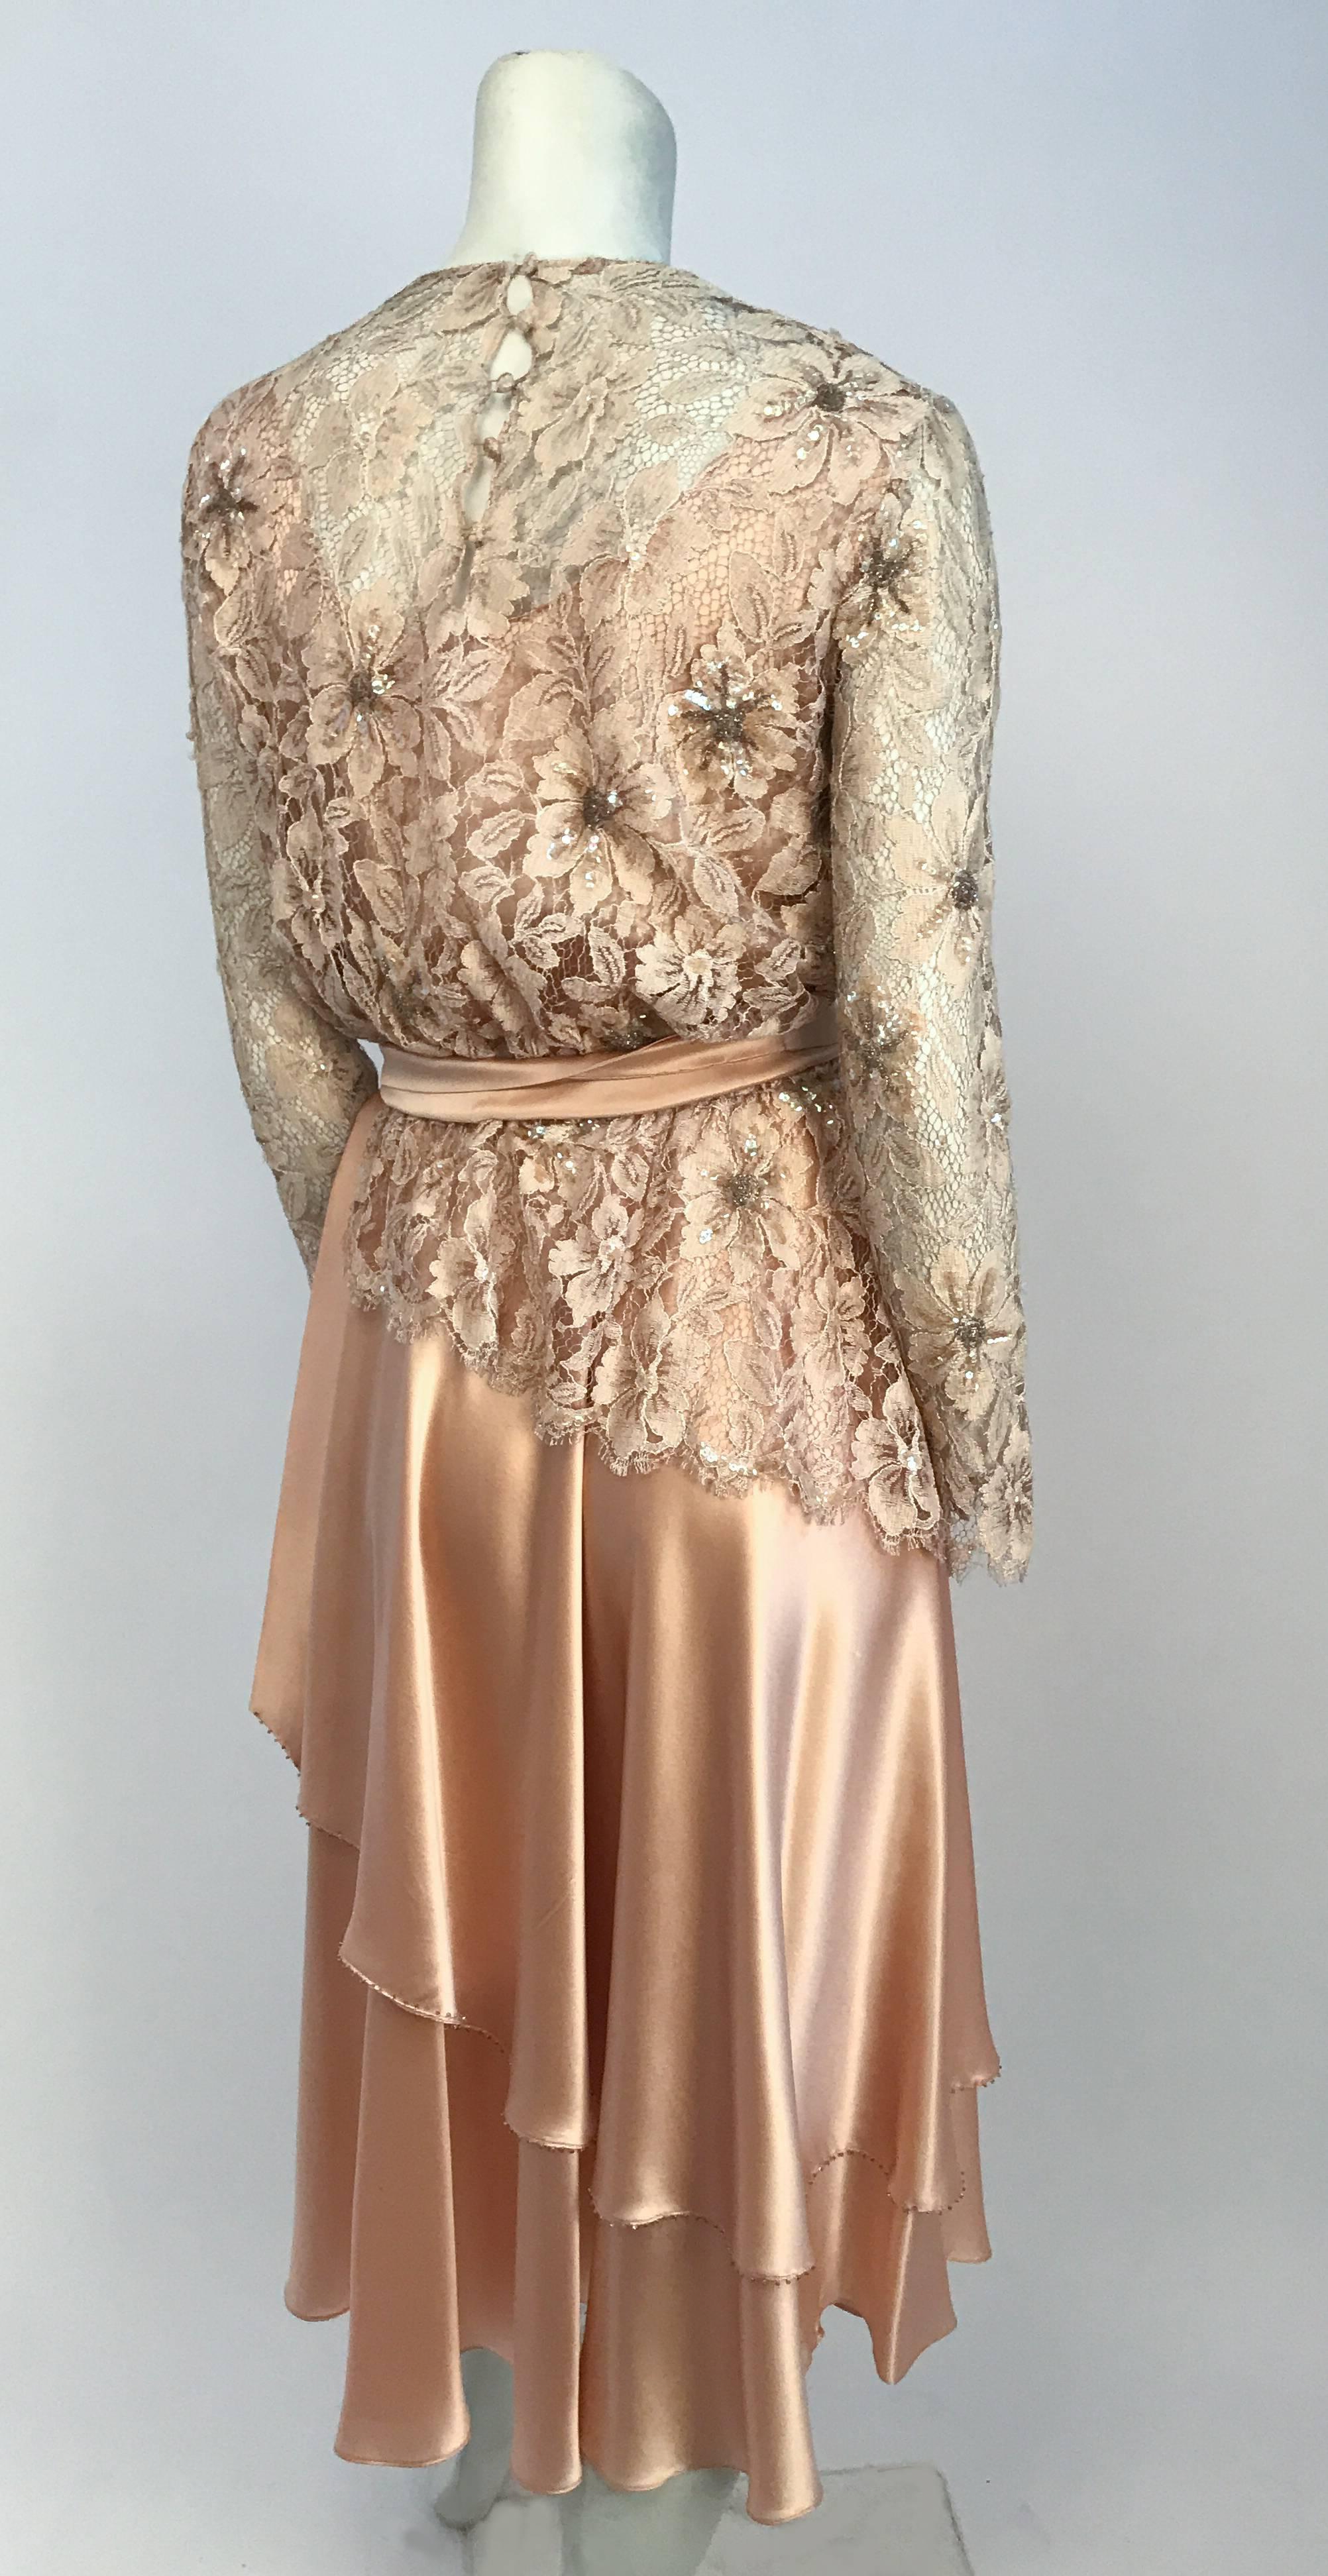 1980's Pink Lace and Satin Dress. Lace and Satin dress with iridescent sequins and beads. Double tiered asymmetrical skirt with beaded hem and French seams. Buttoned back closure and elastic waist. detachable waist sash.